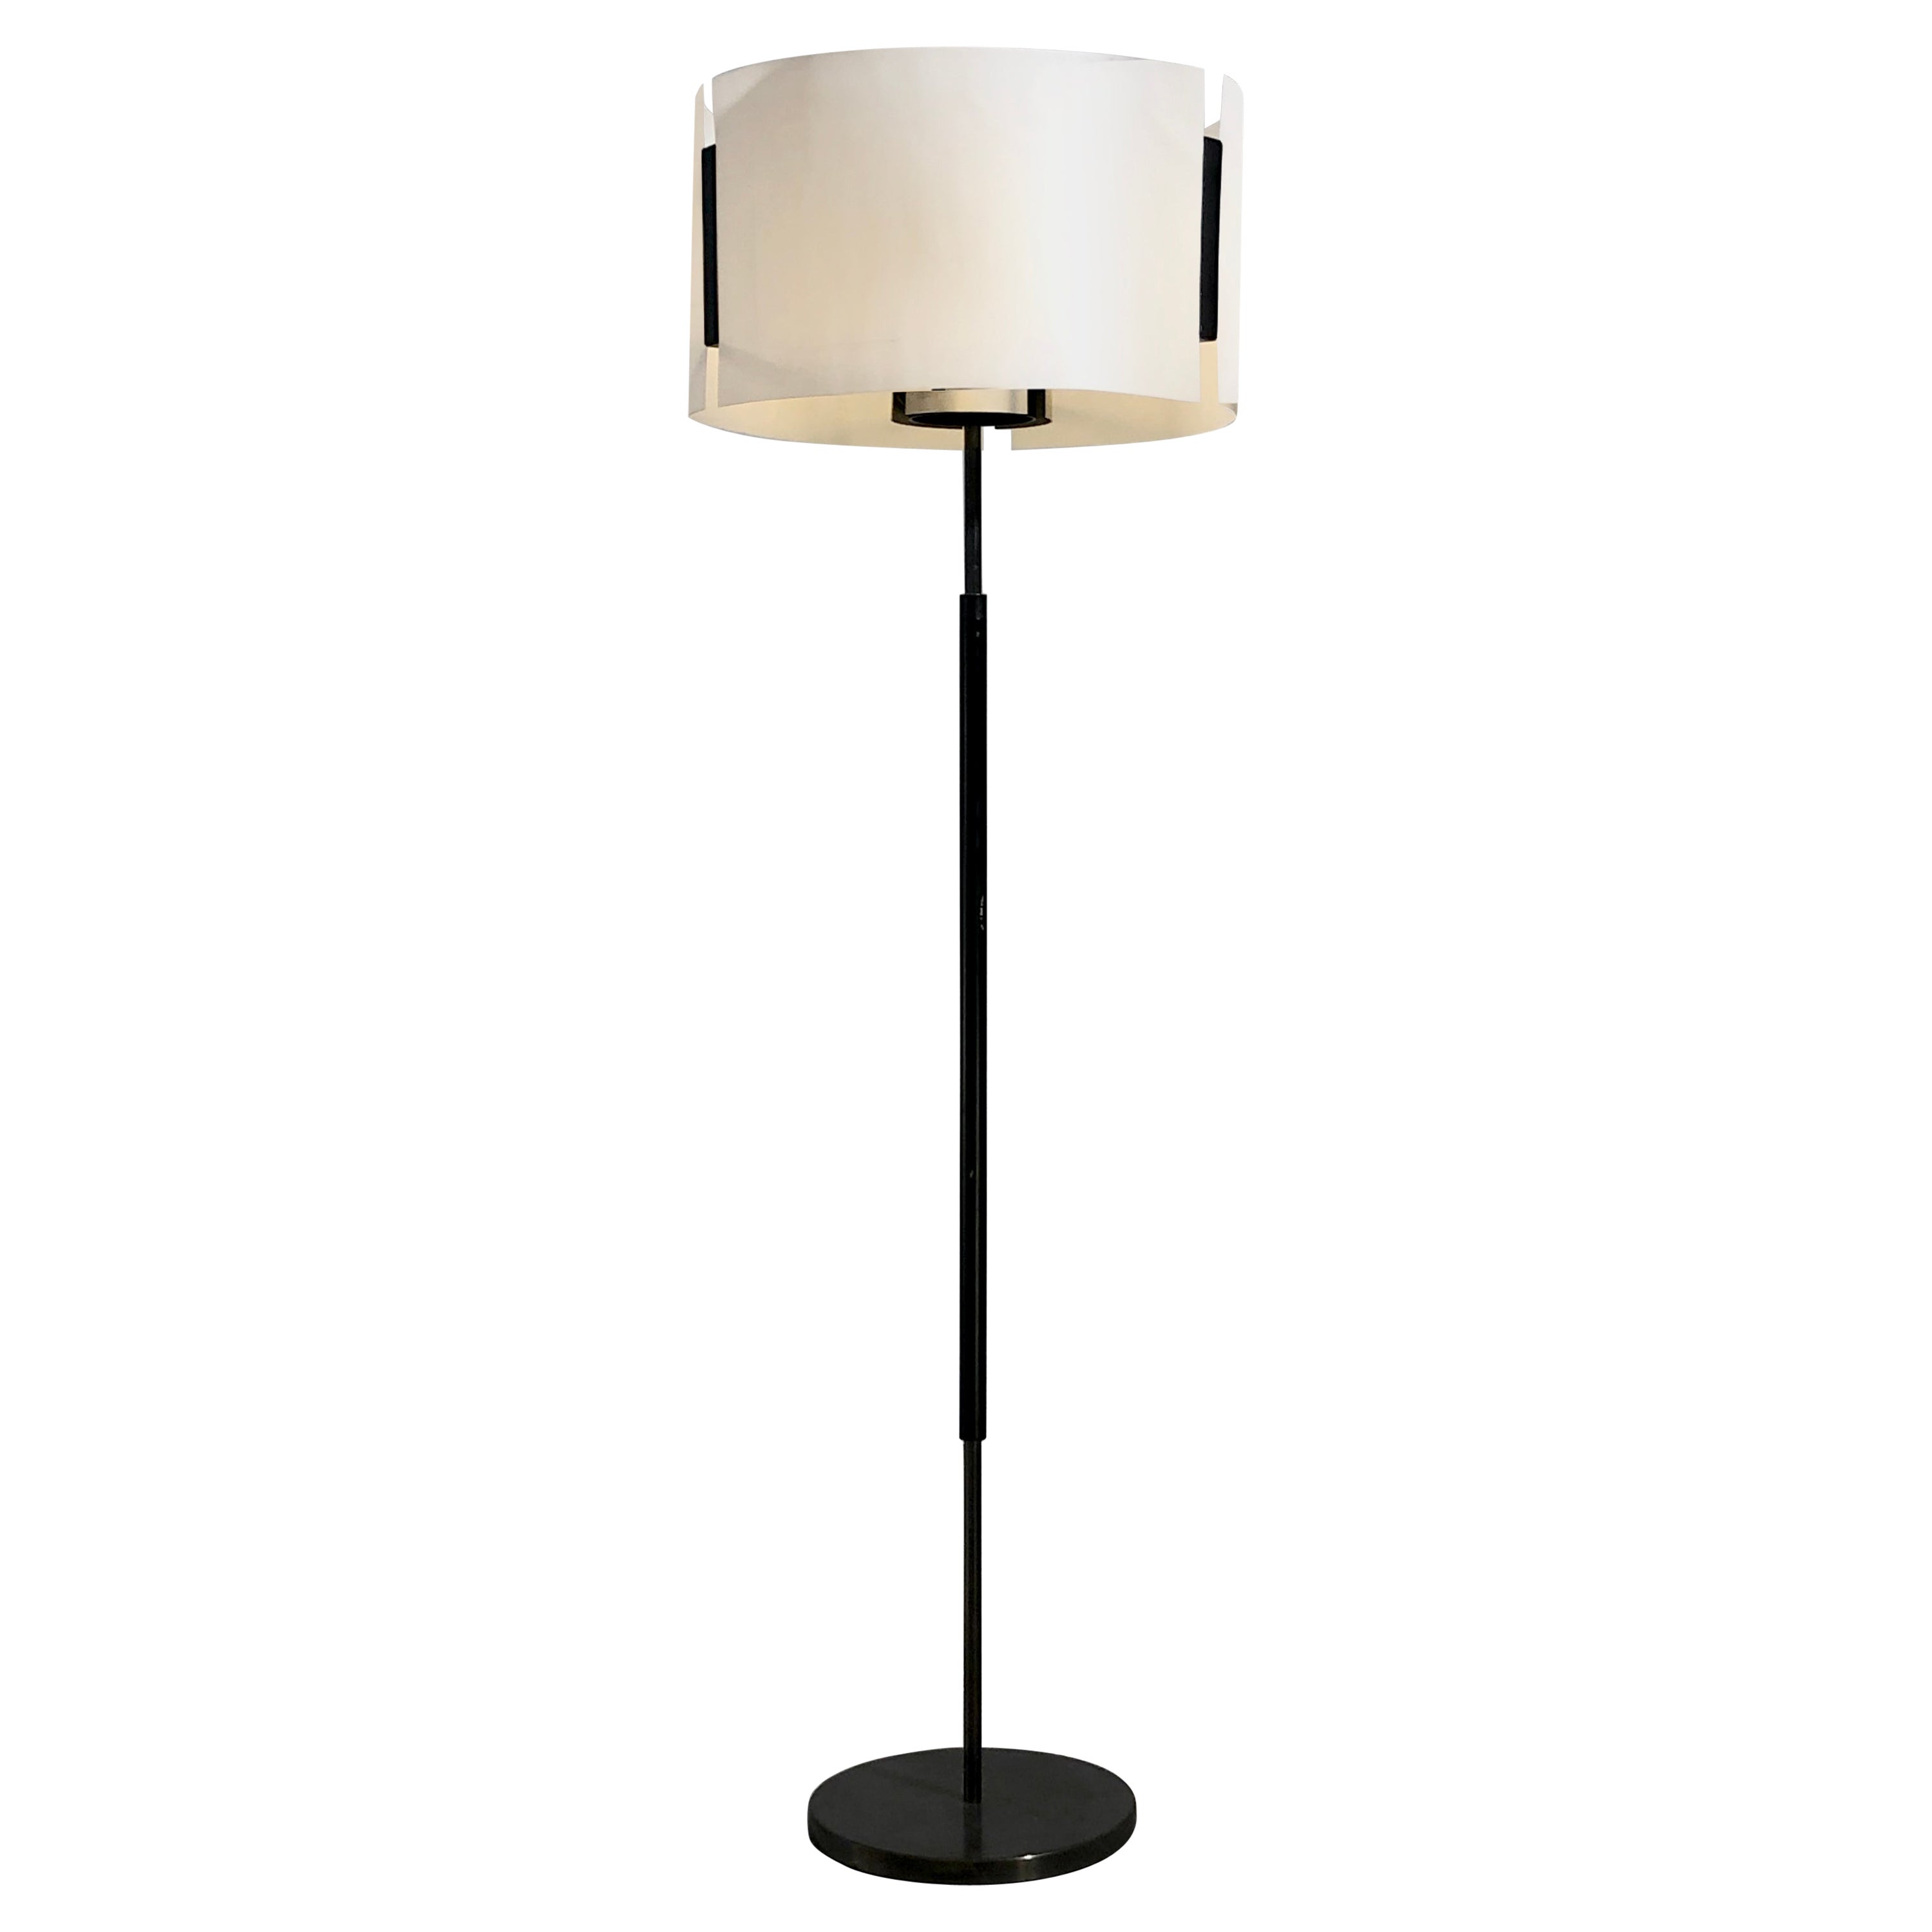 A MID-CENTURY-MODERN MODERNIST FLOOR LAMP by OSTUNI & FORTI, O-LUCE, Italy, 1960 For Sale